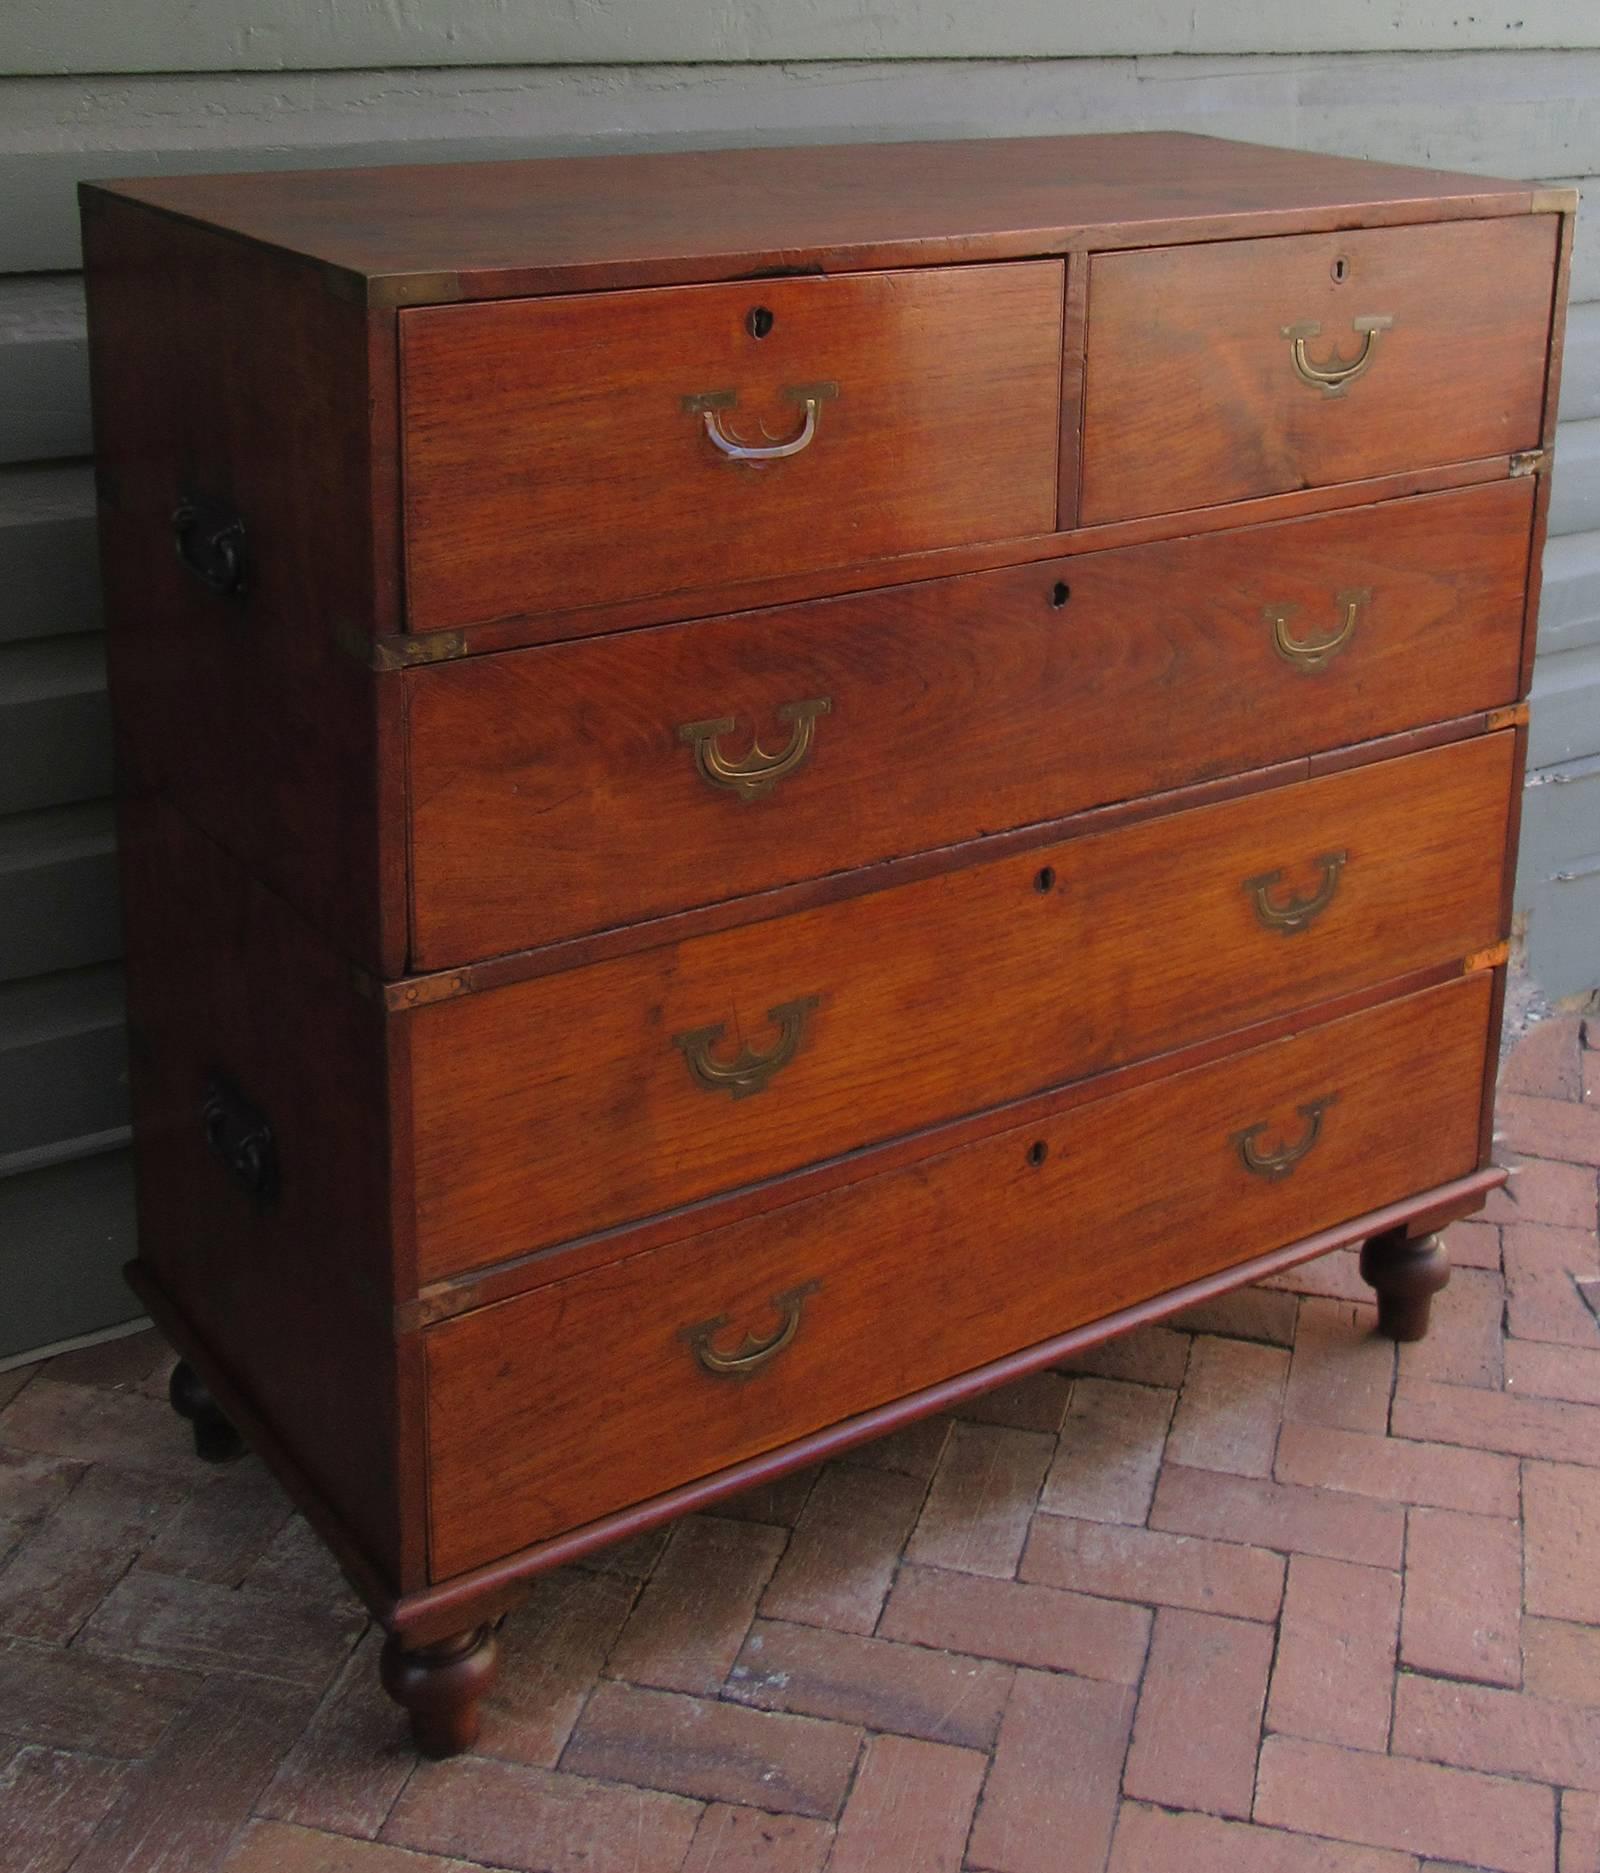 An English Campaign chest of drawers, circa 1840, in a 2/3 drawer configuration and made of mahogany. The feet are original to the chest and the chest is structurally in good condition; however, there have been several repairs to the brass banding